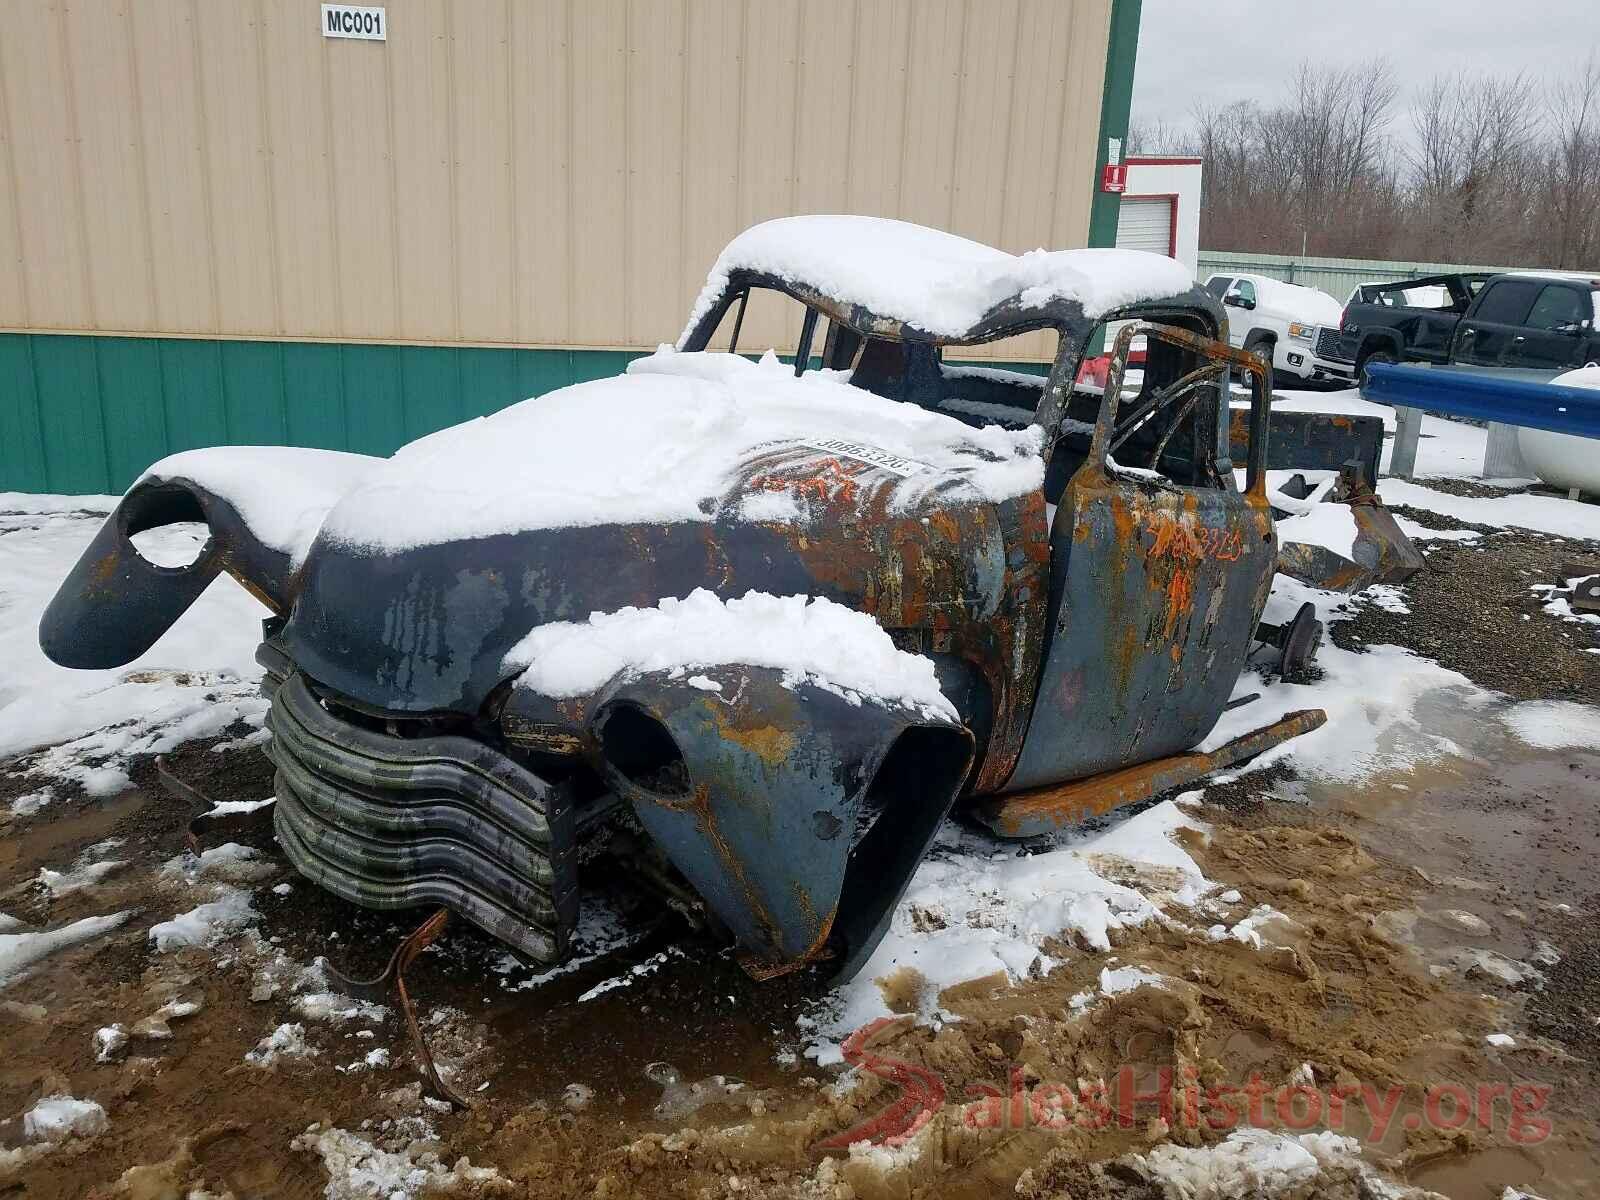 5KTB4917 1952 CHEVROLET ALL OTHER